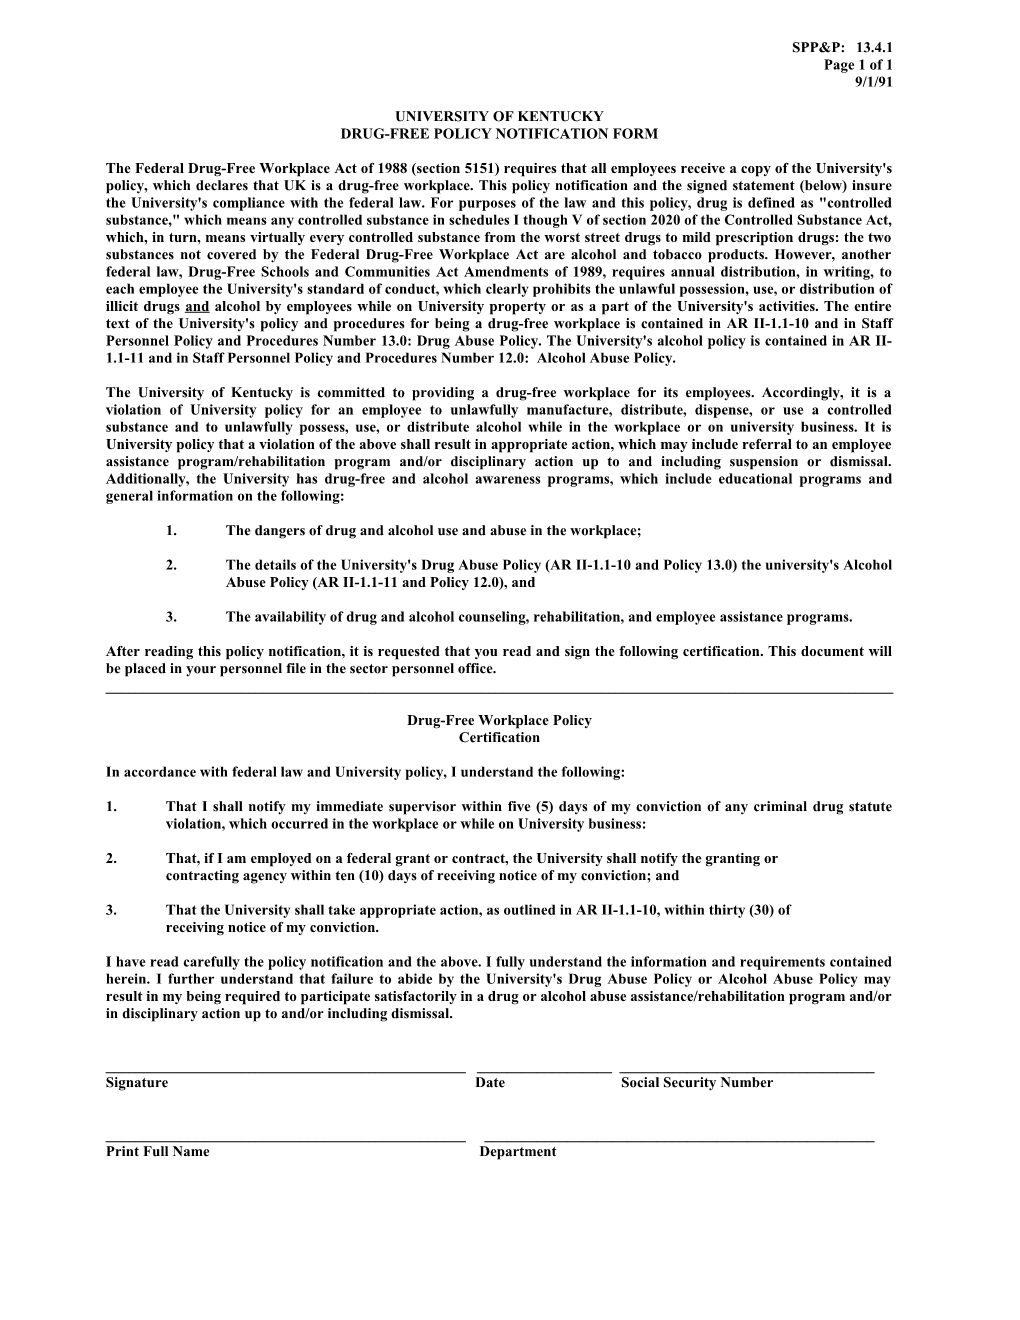 Drug-Free Policy Notification Form